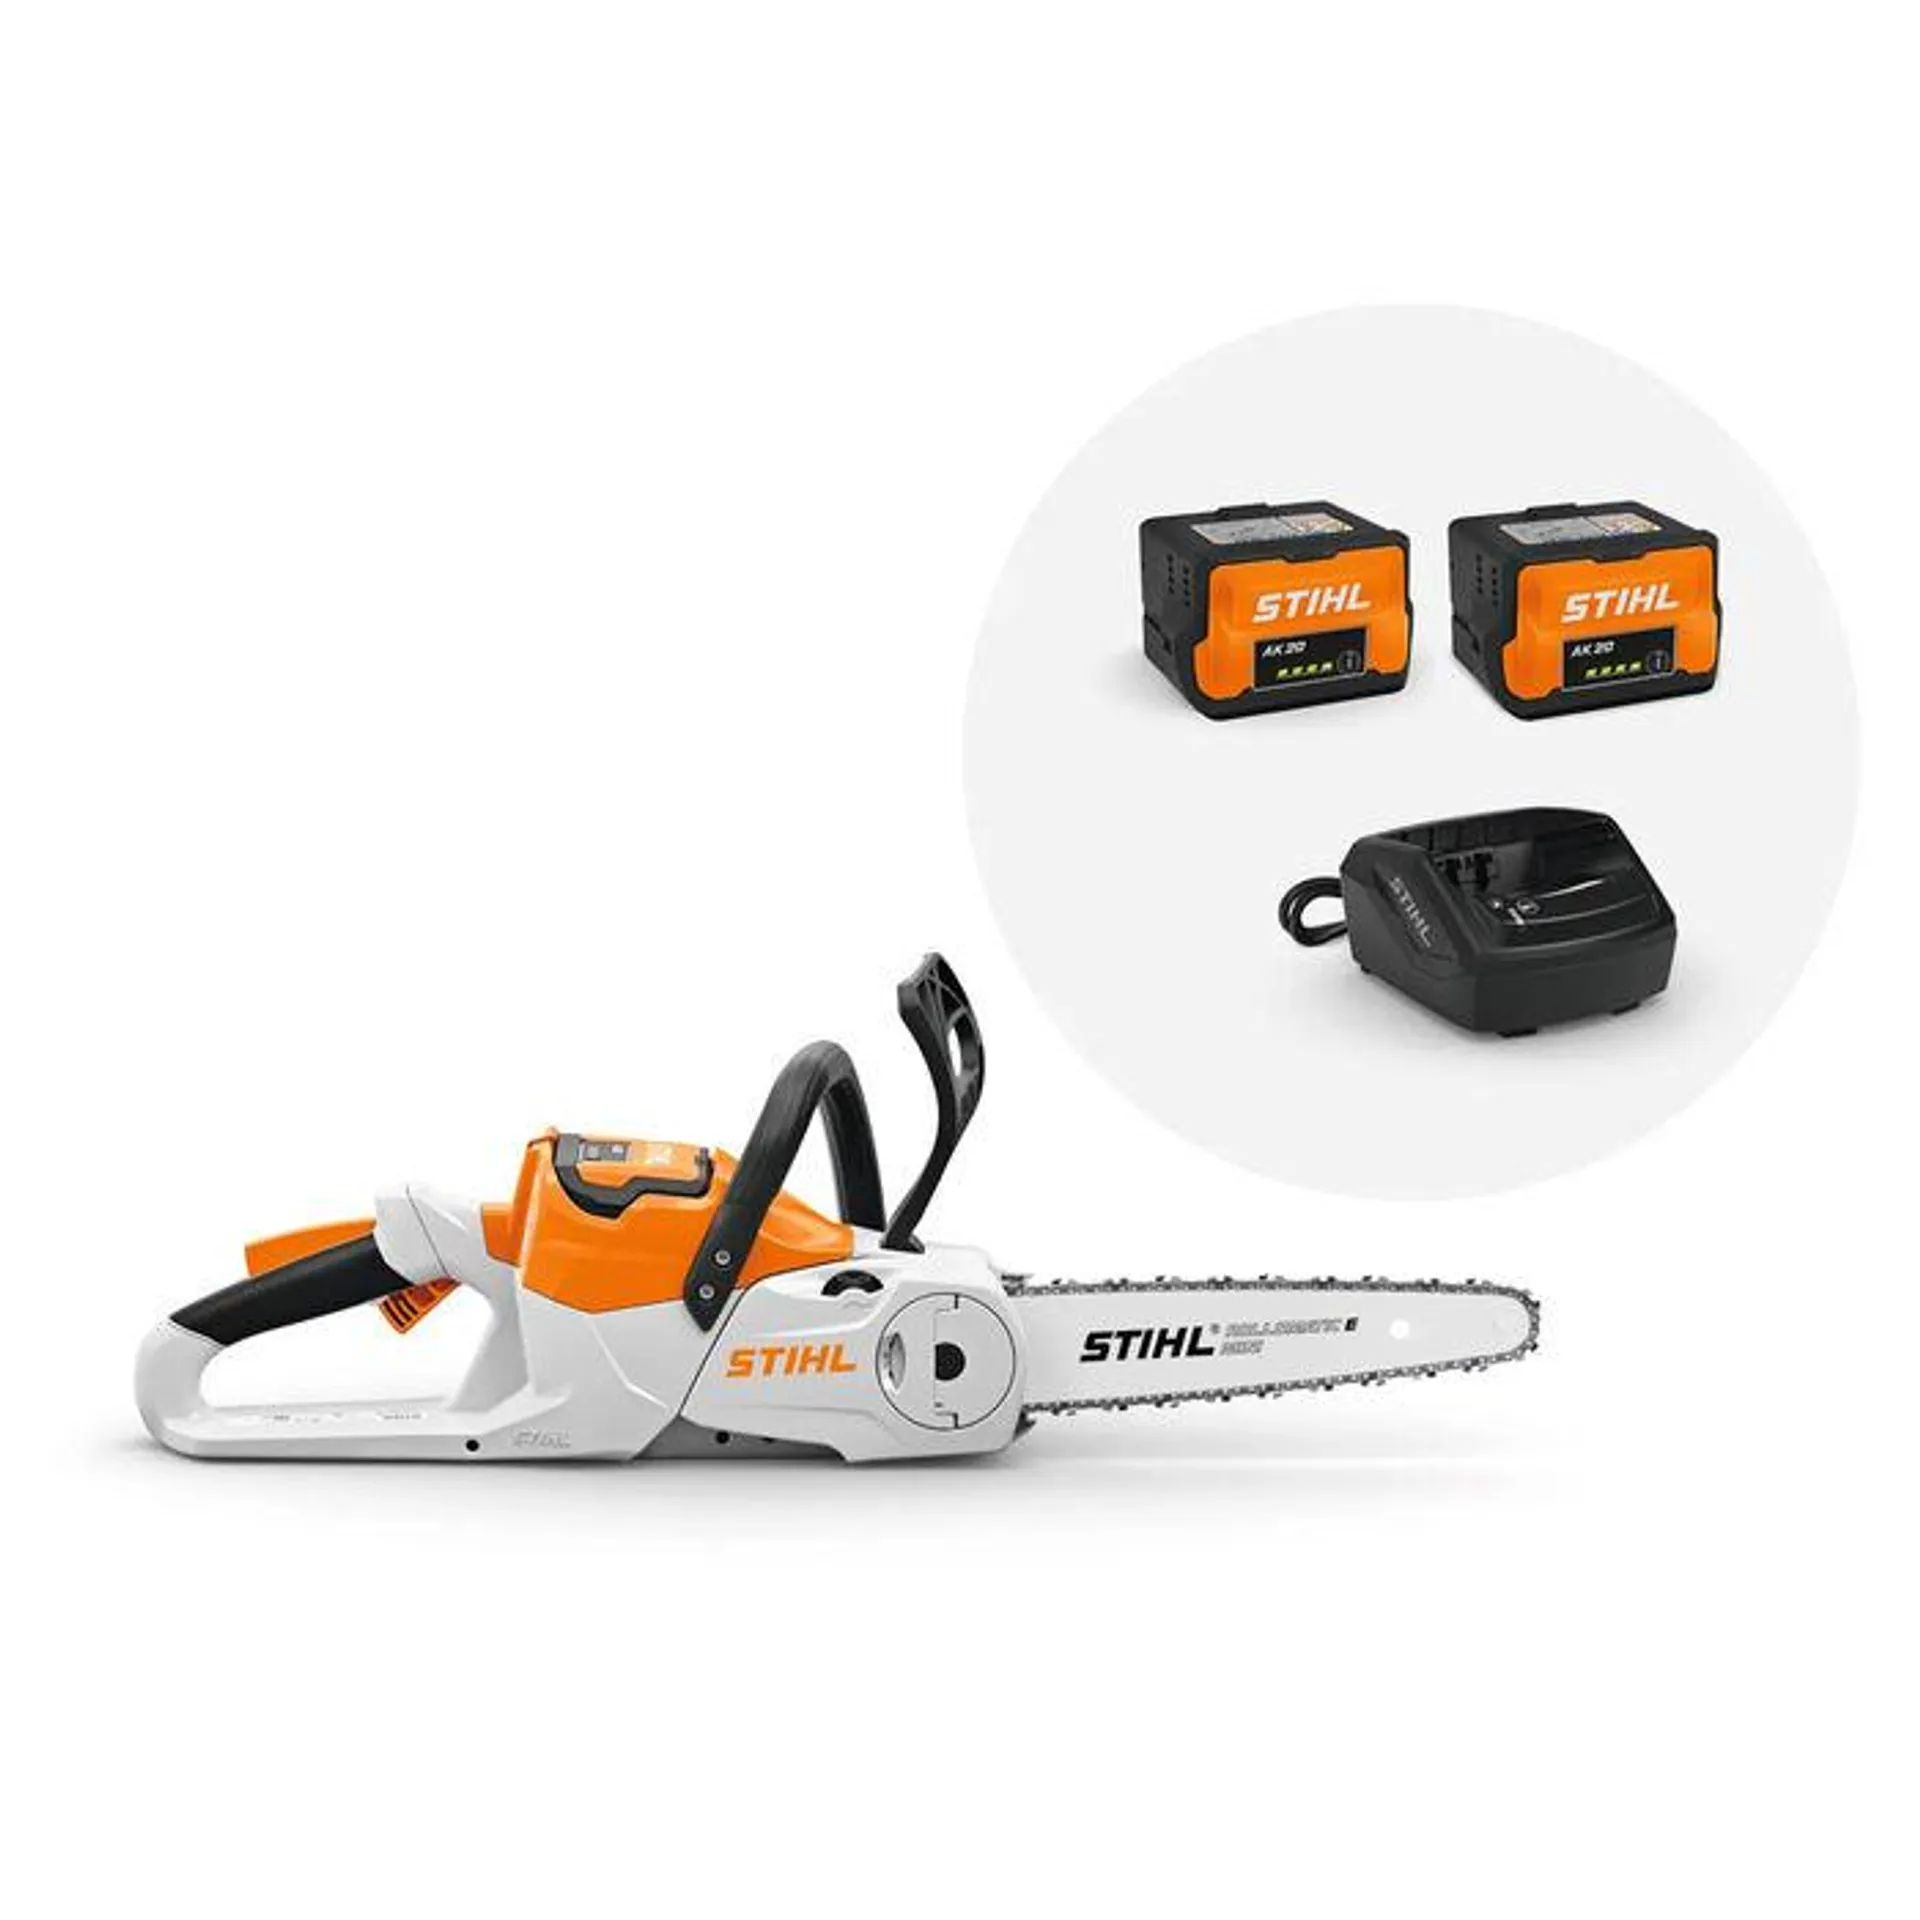 STIHL MSA 60 Battery Chainsaw Kit with free second battery